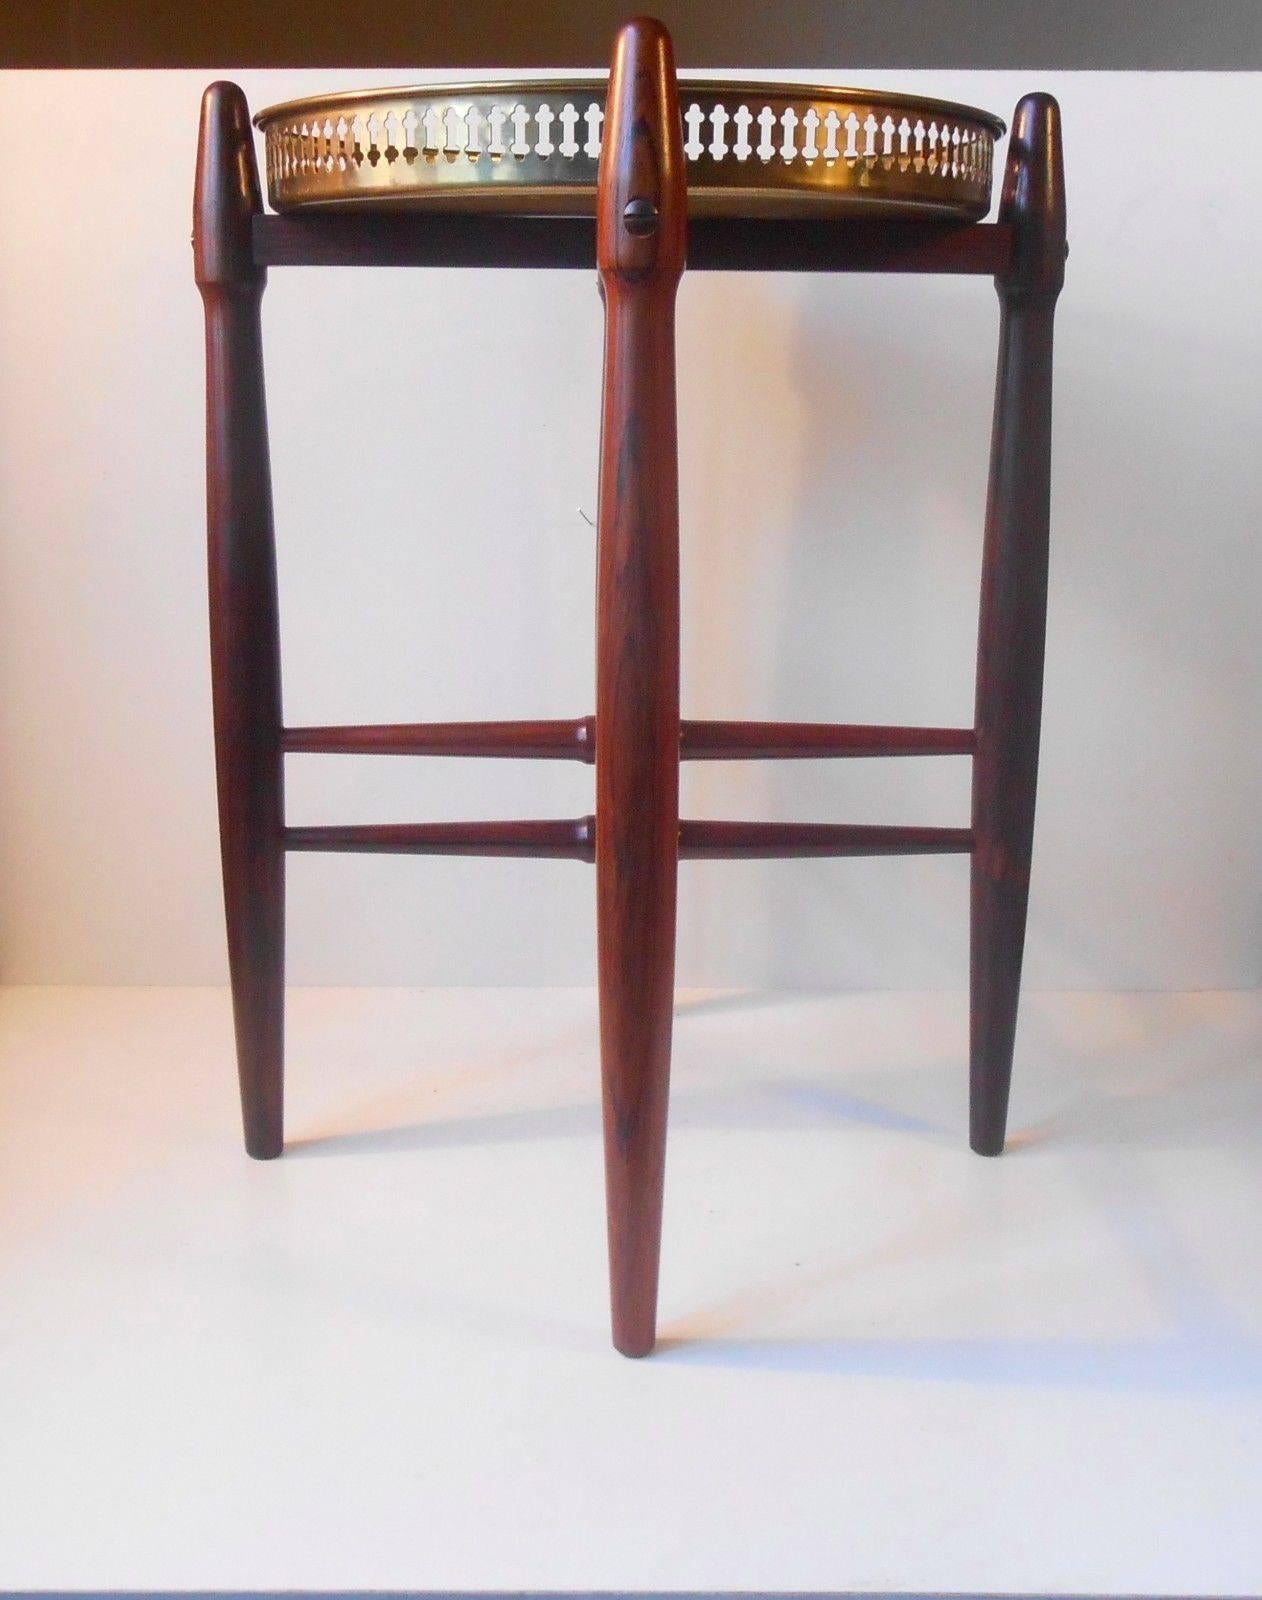 Brass Rosewood Side Table with brass Tray by Poul Hundevad, Denmark, 1960s